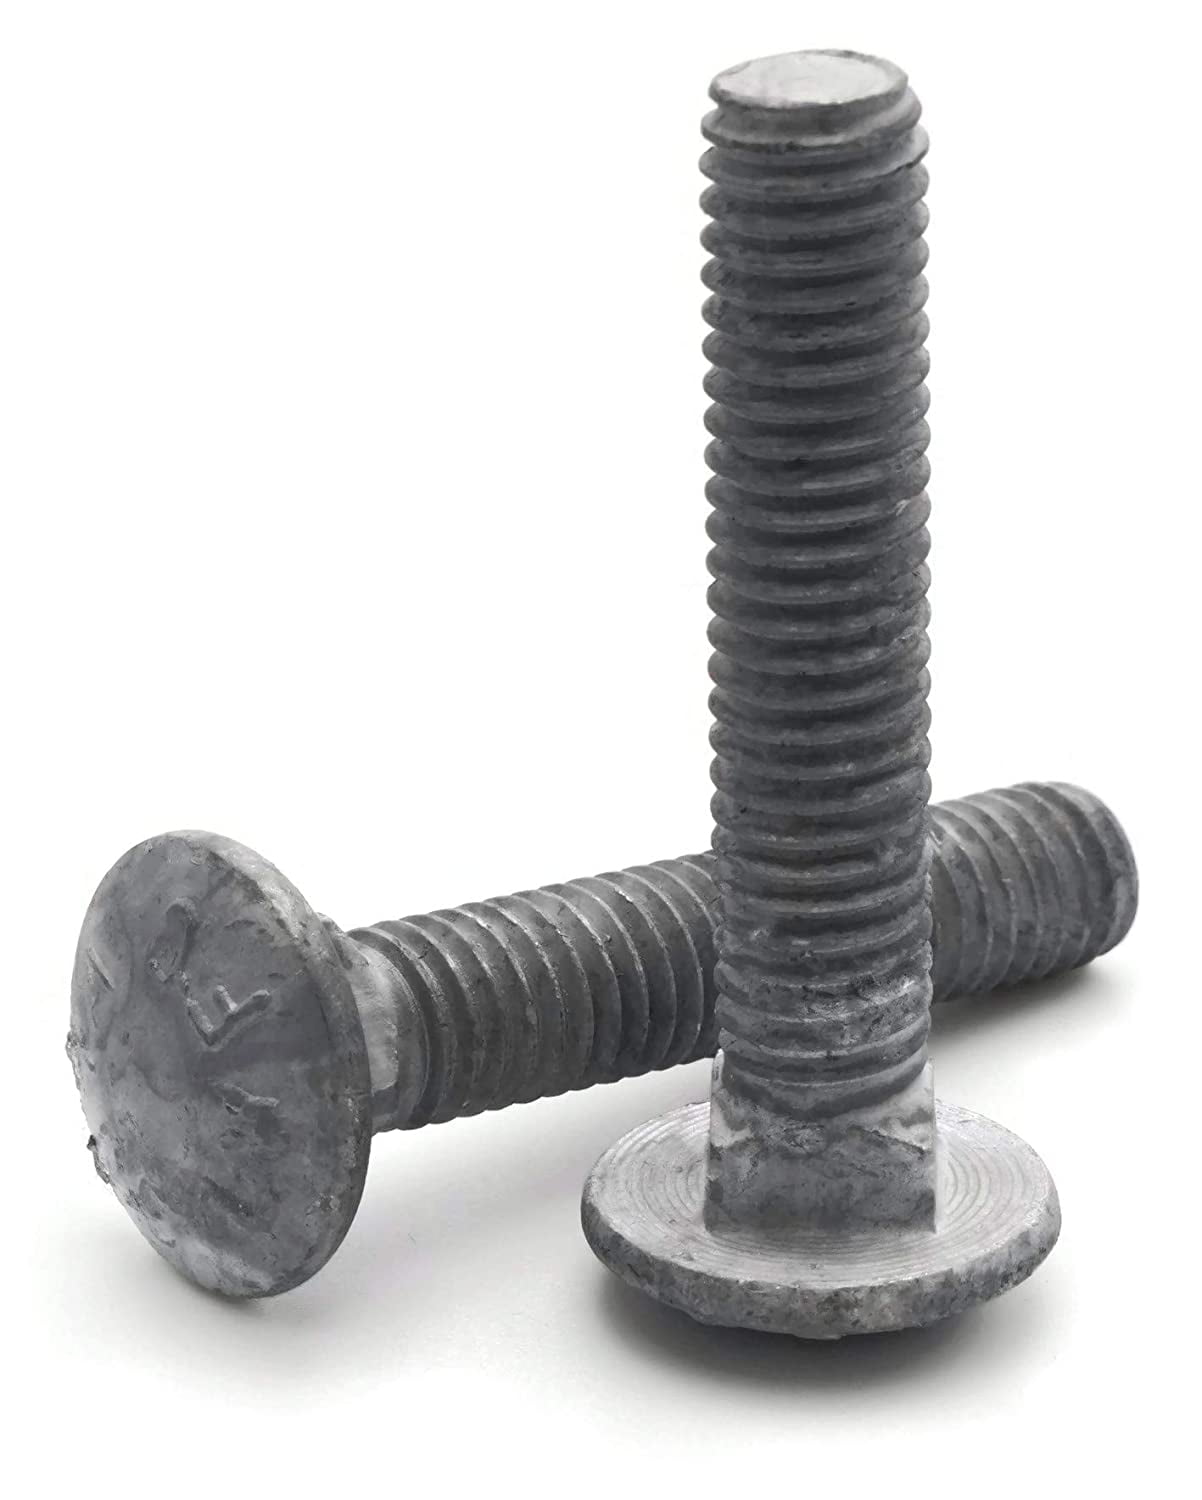 Grip-Rite 1/2” x 6” Hot Dipped Galvanized Carriage Bolt 25-Count 